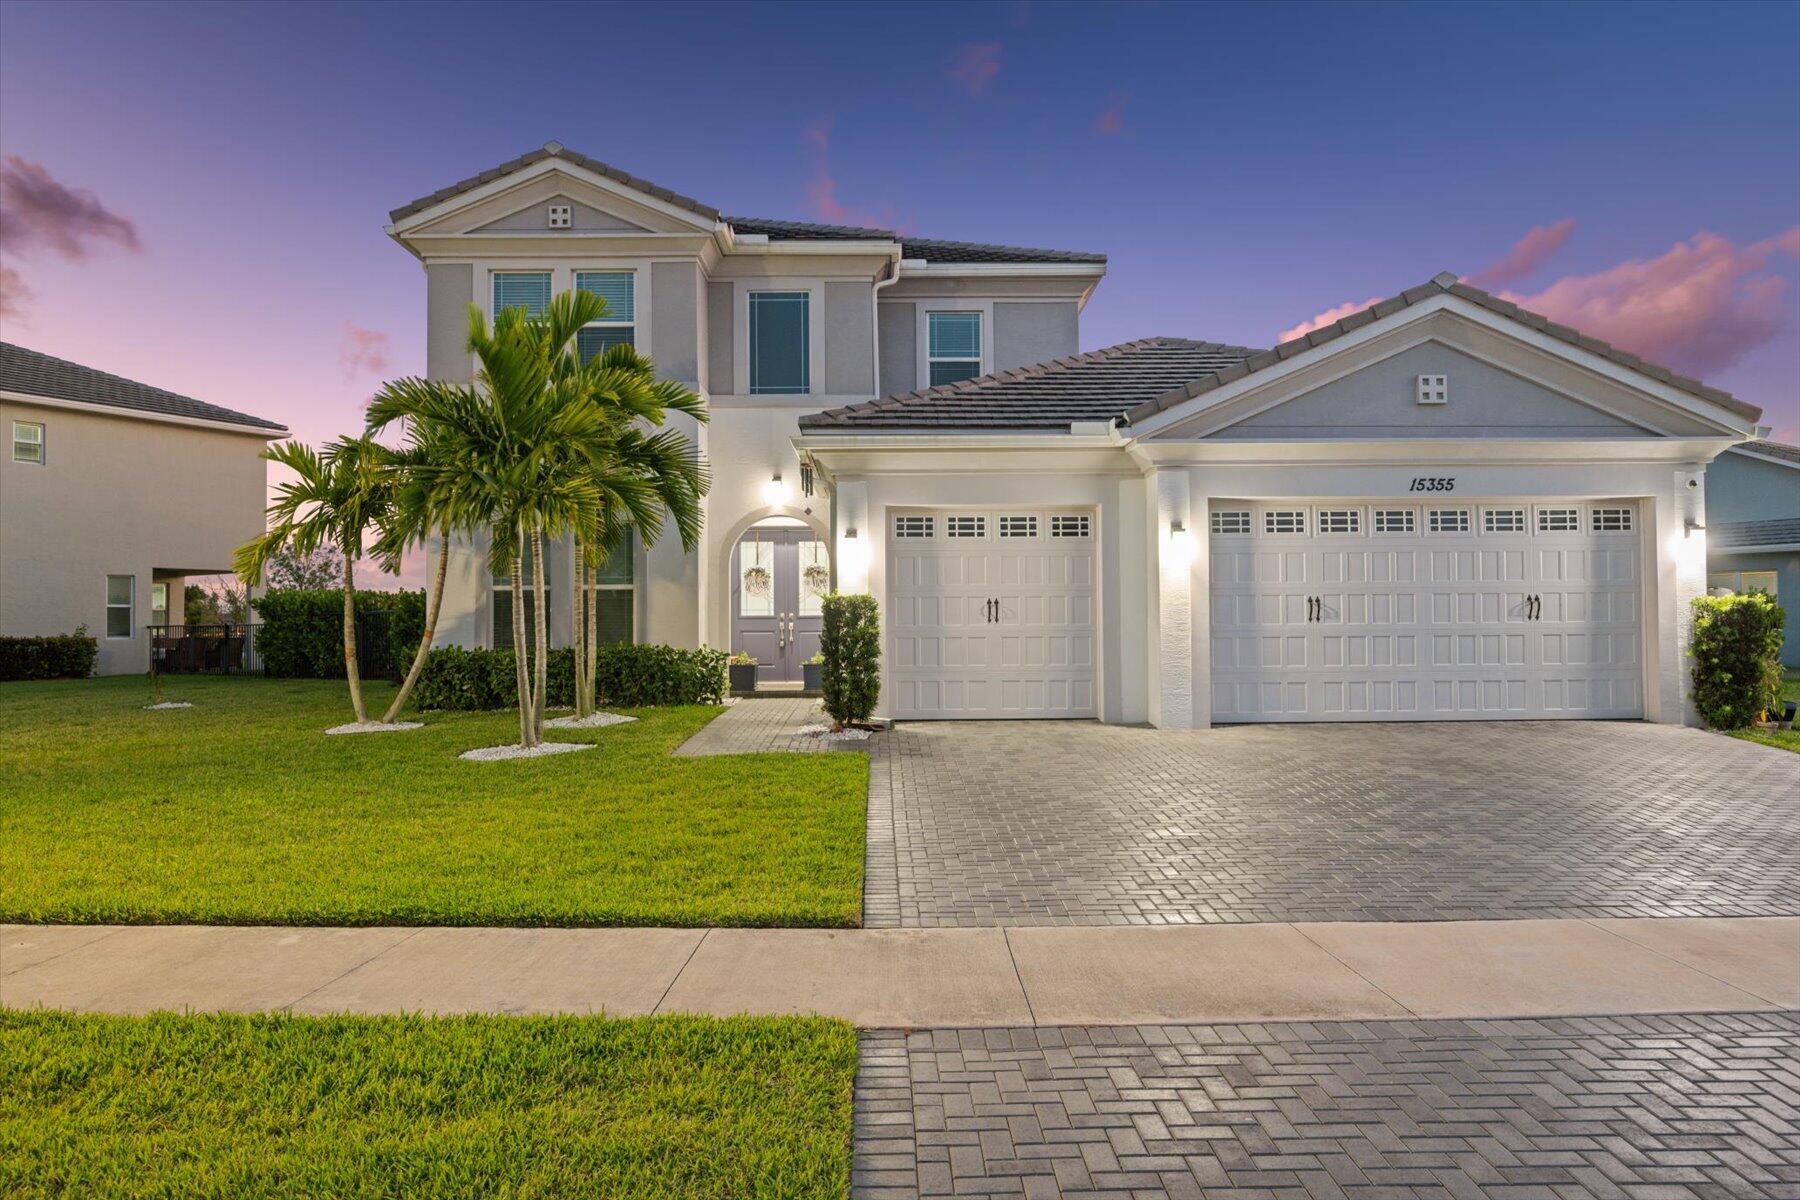 15355 Goldfinch Circle, Westlake, Palm Beach County, Florida - 6 Bedrooms  
4.5 Bathrooms - 